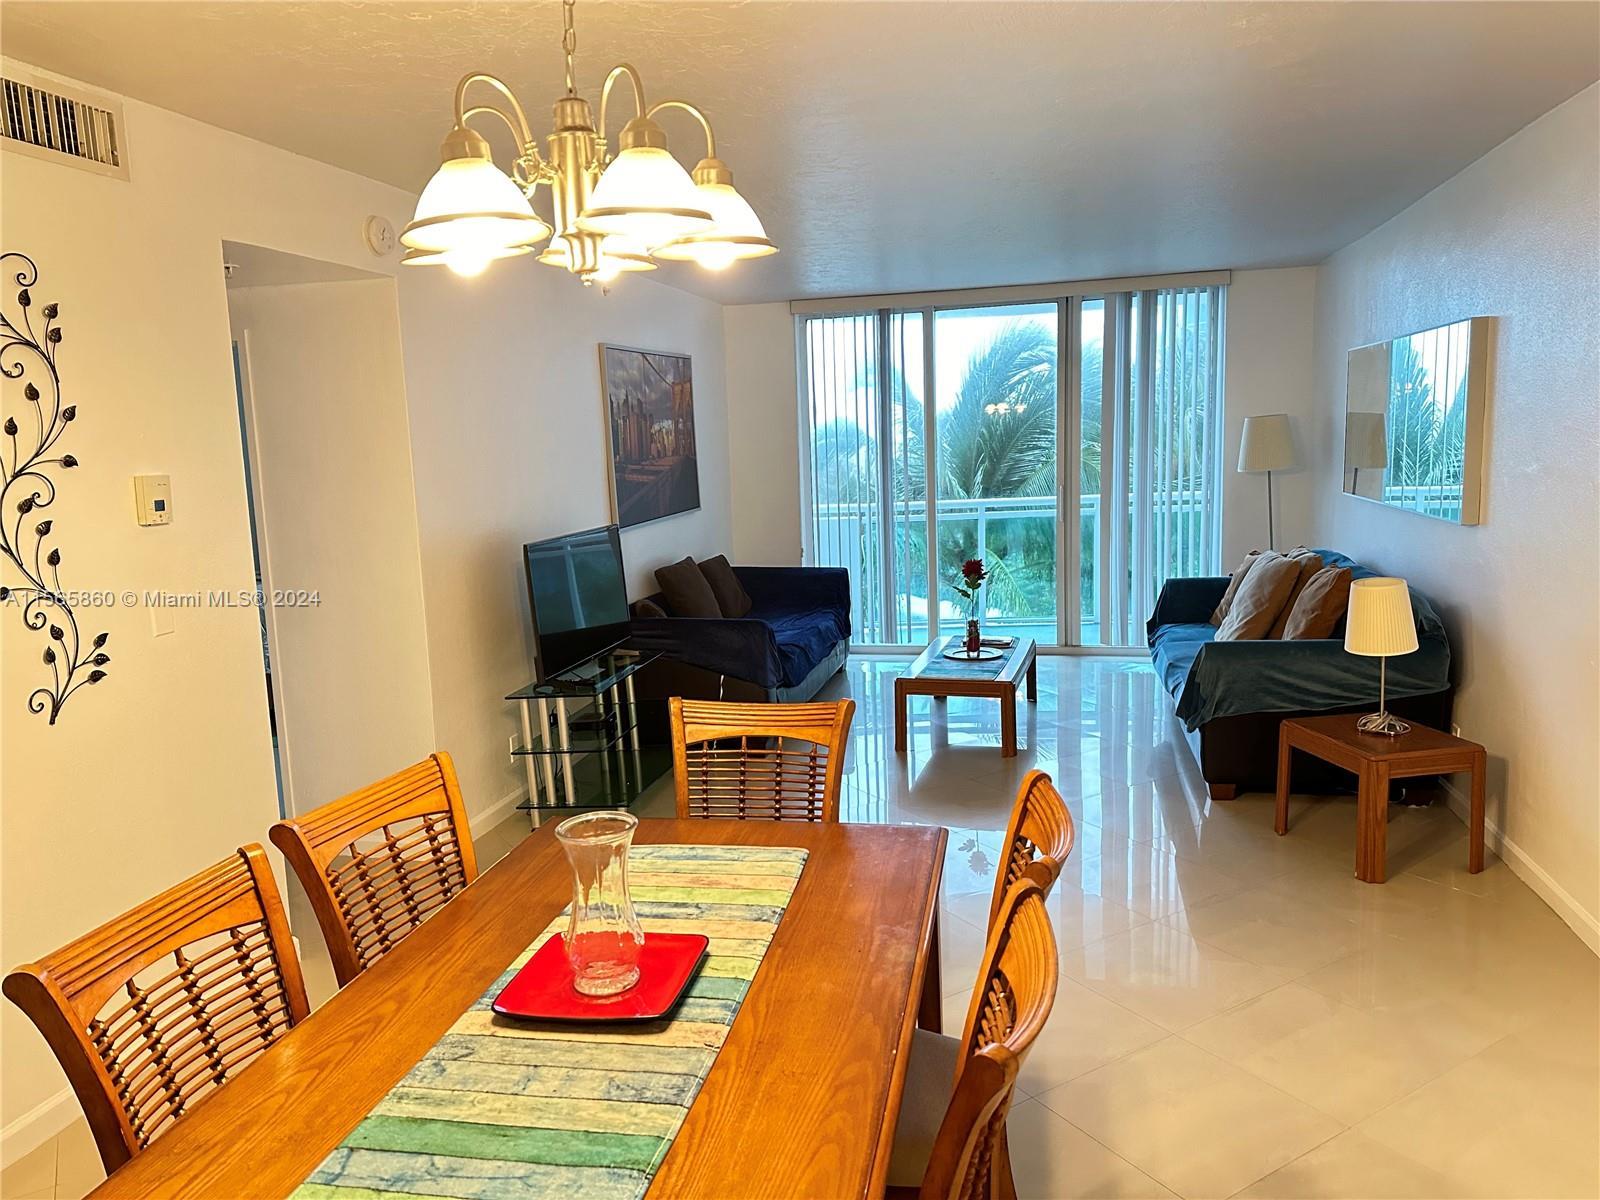 Photo of 3001 S Ocean Dr #423 E in Hollywood, FL